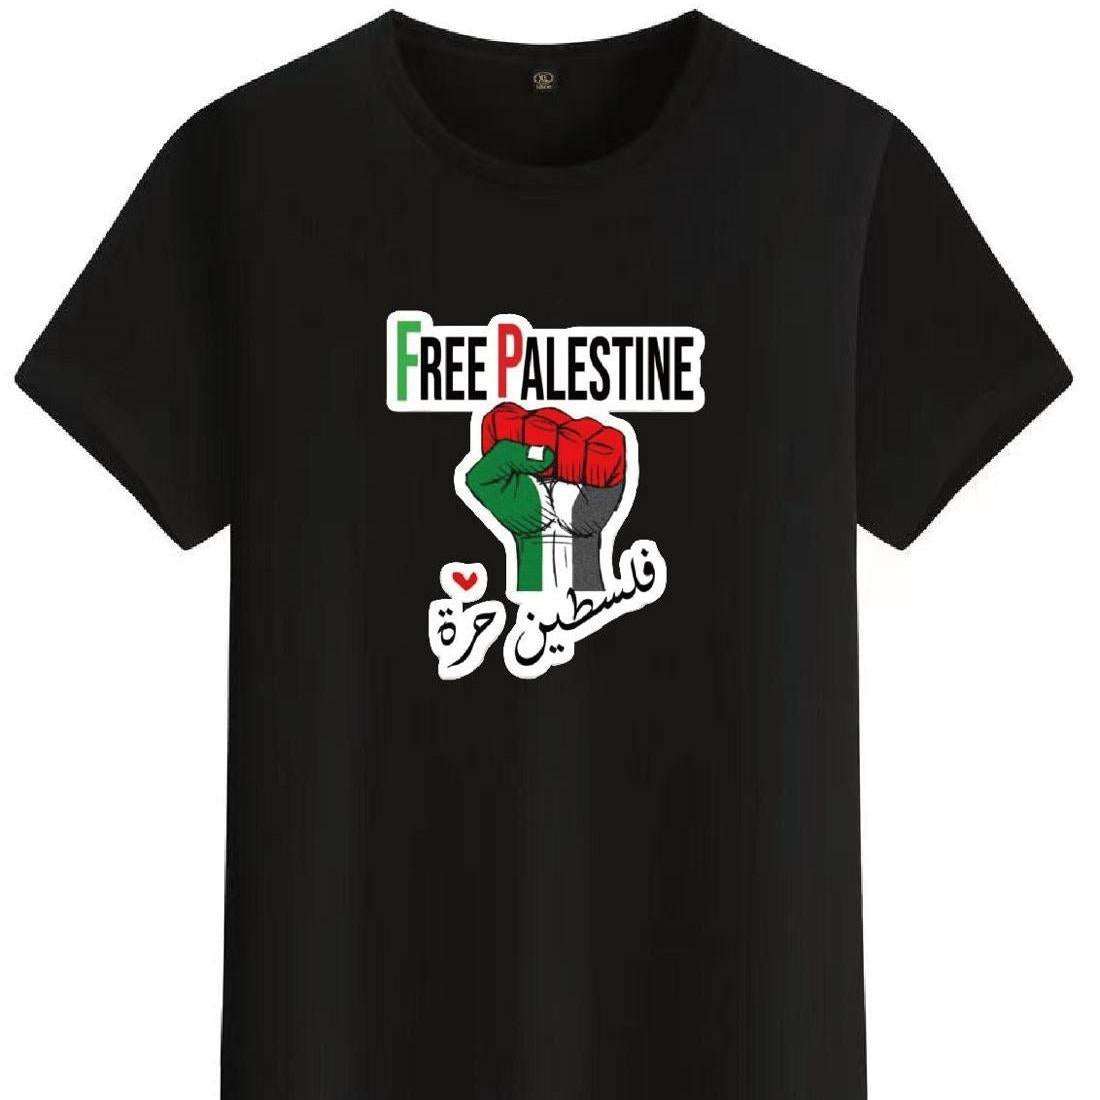 High-Quality Free Palestine Shirt with Fist Design: 100% Cotton